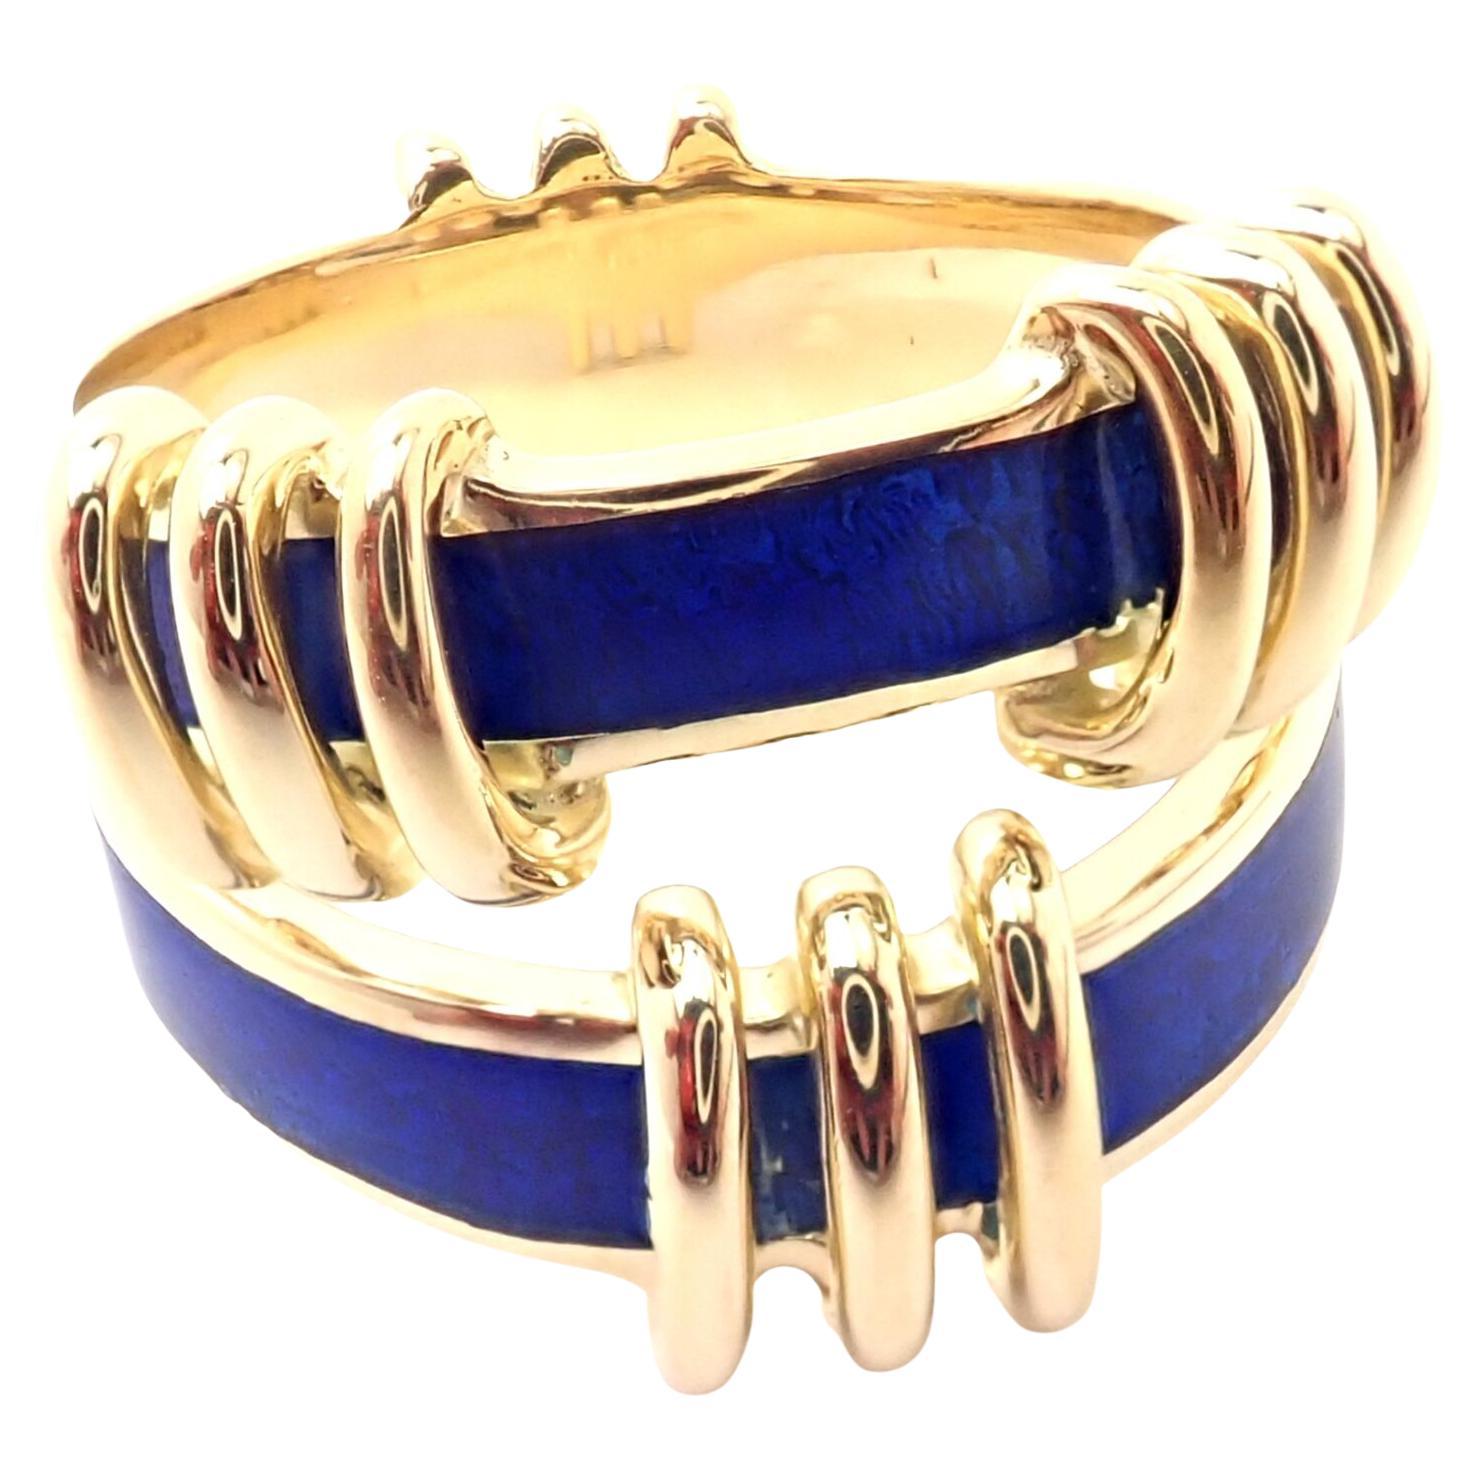 Tiffany & Co. Jean Schlumberger Blue Enamel Yellow Gold Band Ring